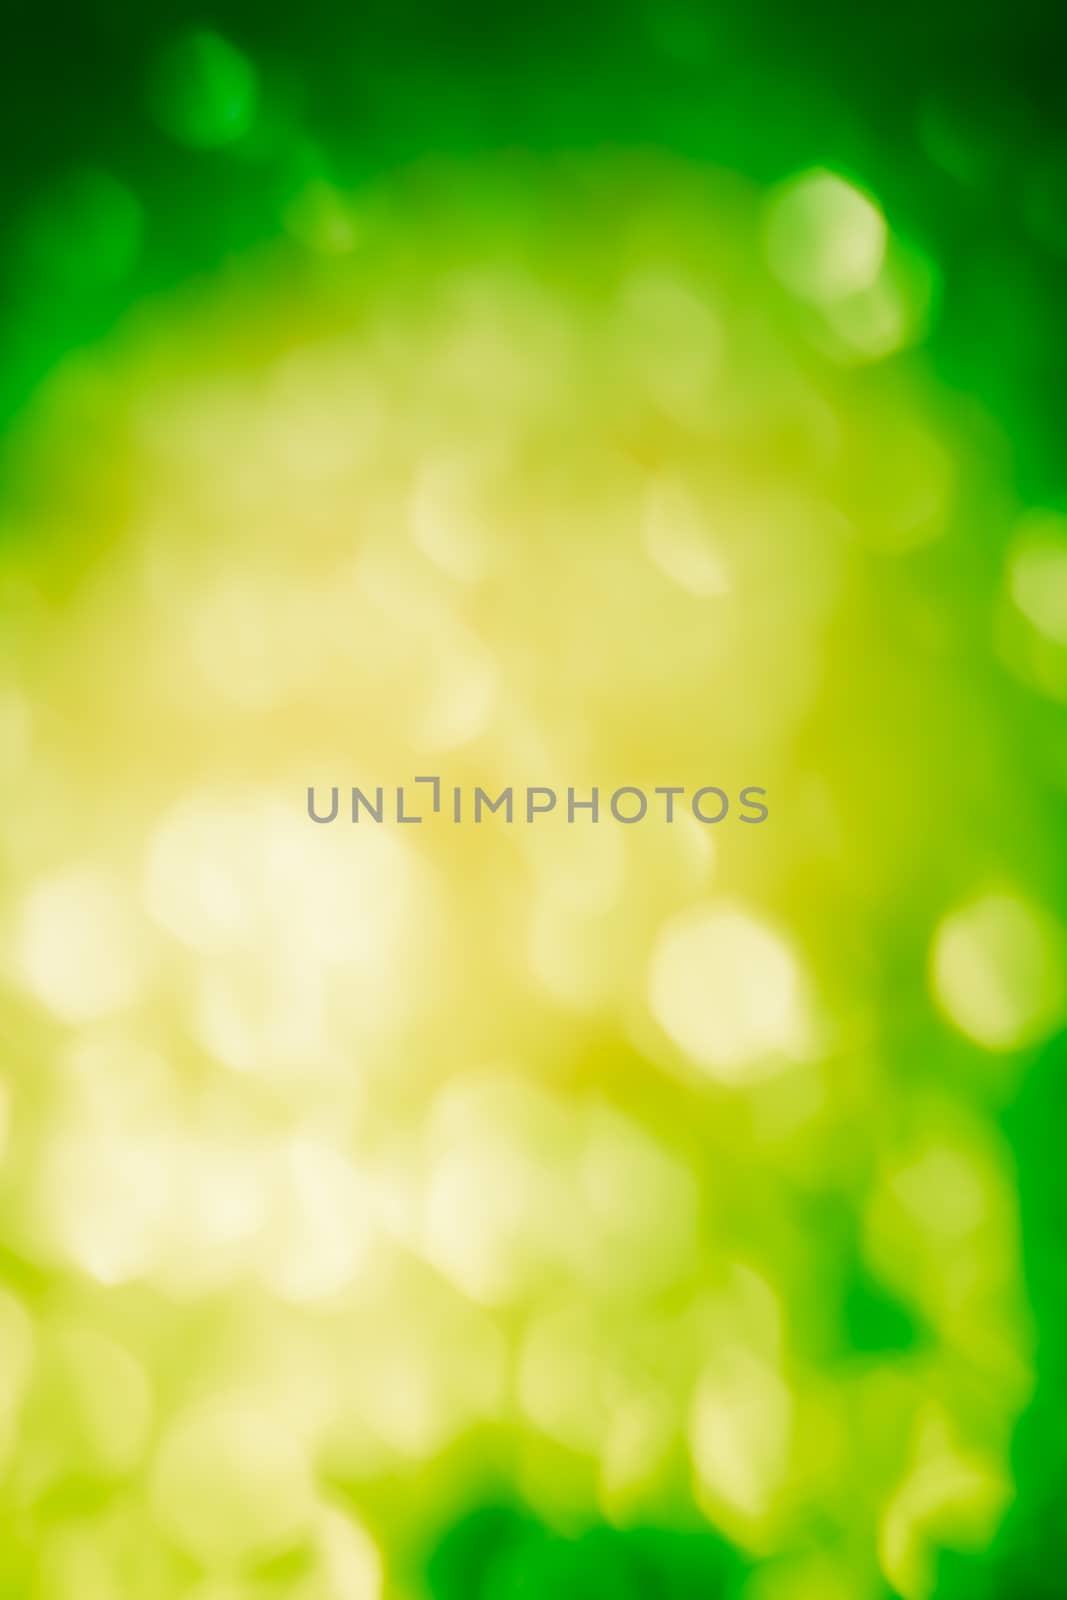 Blurred lights with bokeh effect Background, Abstract Blur, , blurred background for your design